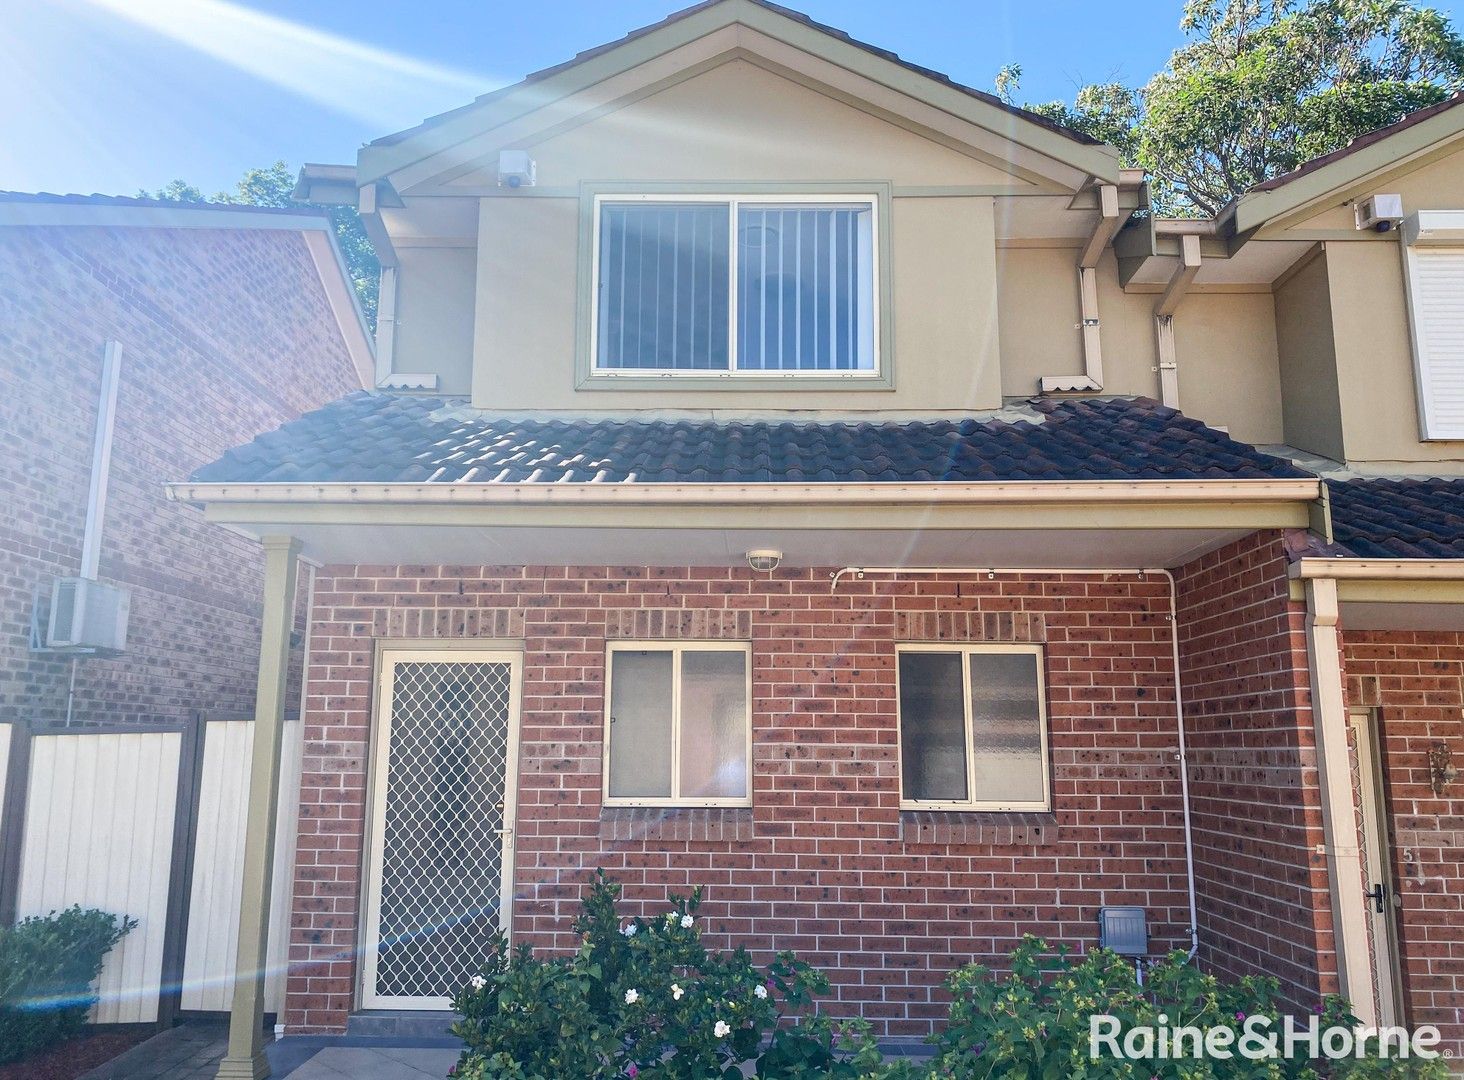 2 bedrooms Townhouse in 4/13 LIBERTY STREET BELMORE NSW, 2192